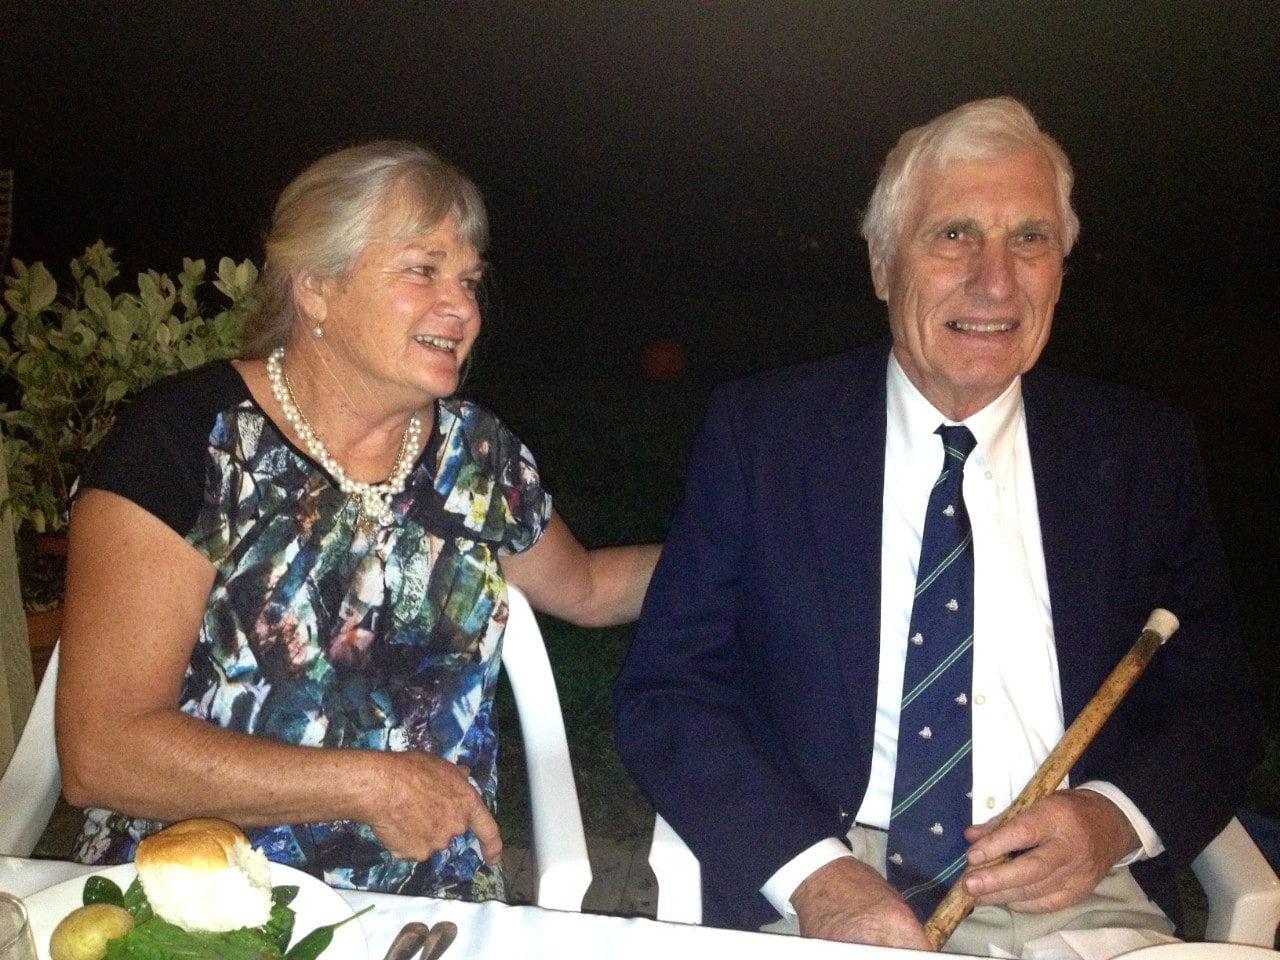 Photograph of Richard and Lynda Rouse, who have given $1 million to medical research.